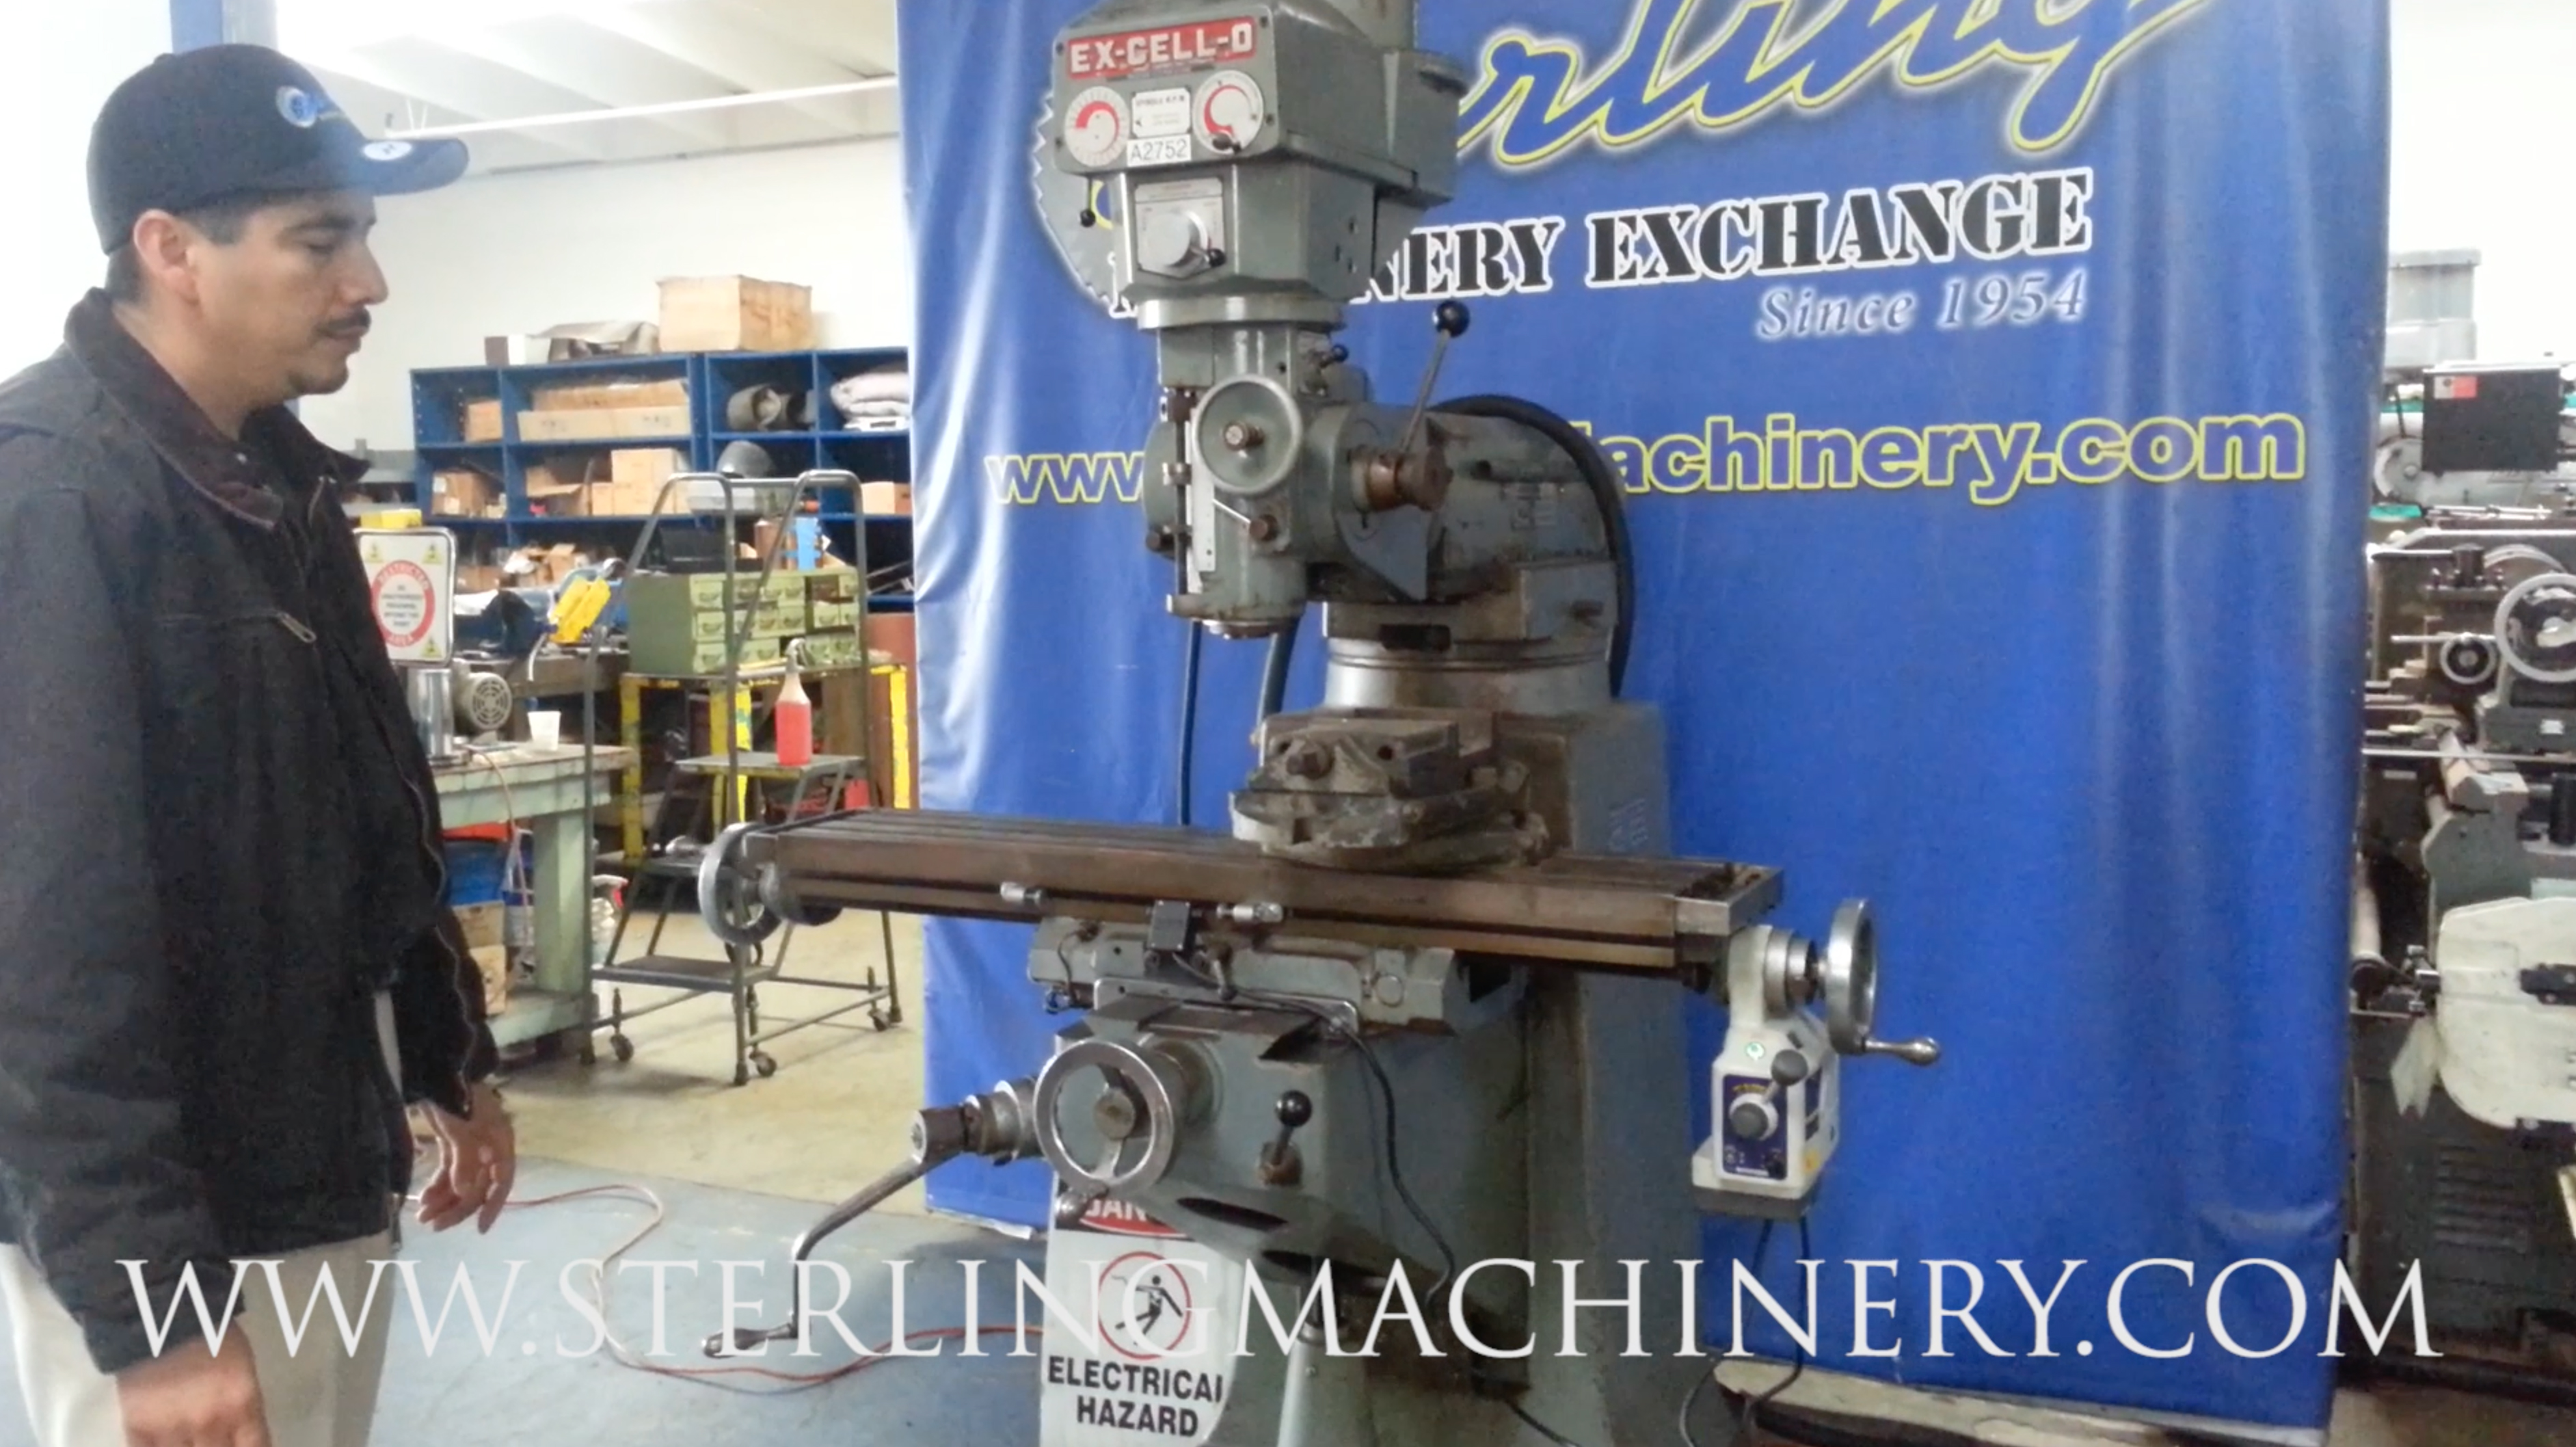 EX-CELL-O-9" x 42" Used EX-CELL-O Variable Speed Vertical Milling Machine, Mdl. 602, One- Shot Lube System, Table Power Feed, Variable Speed Head,  #A2752-01